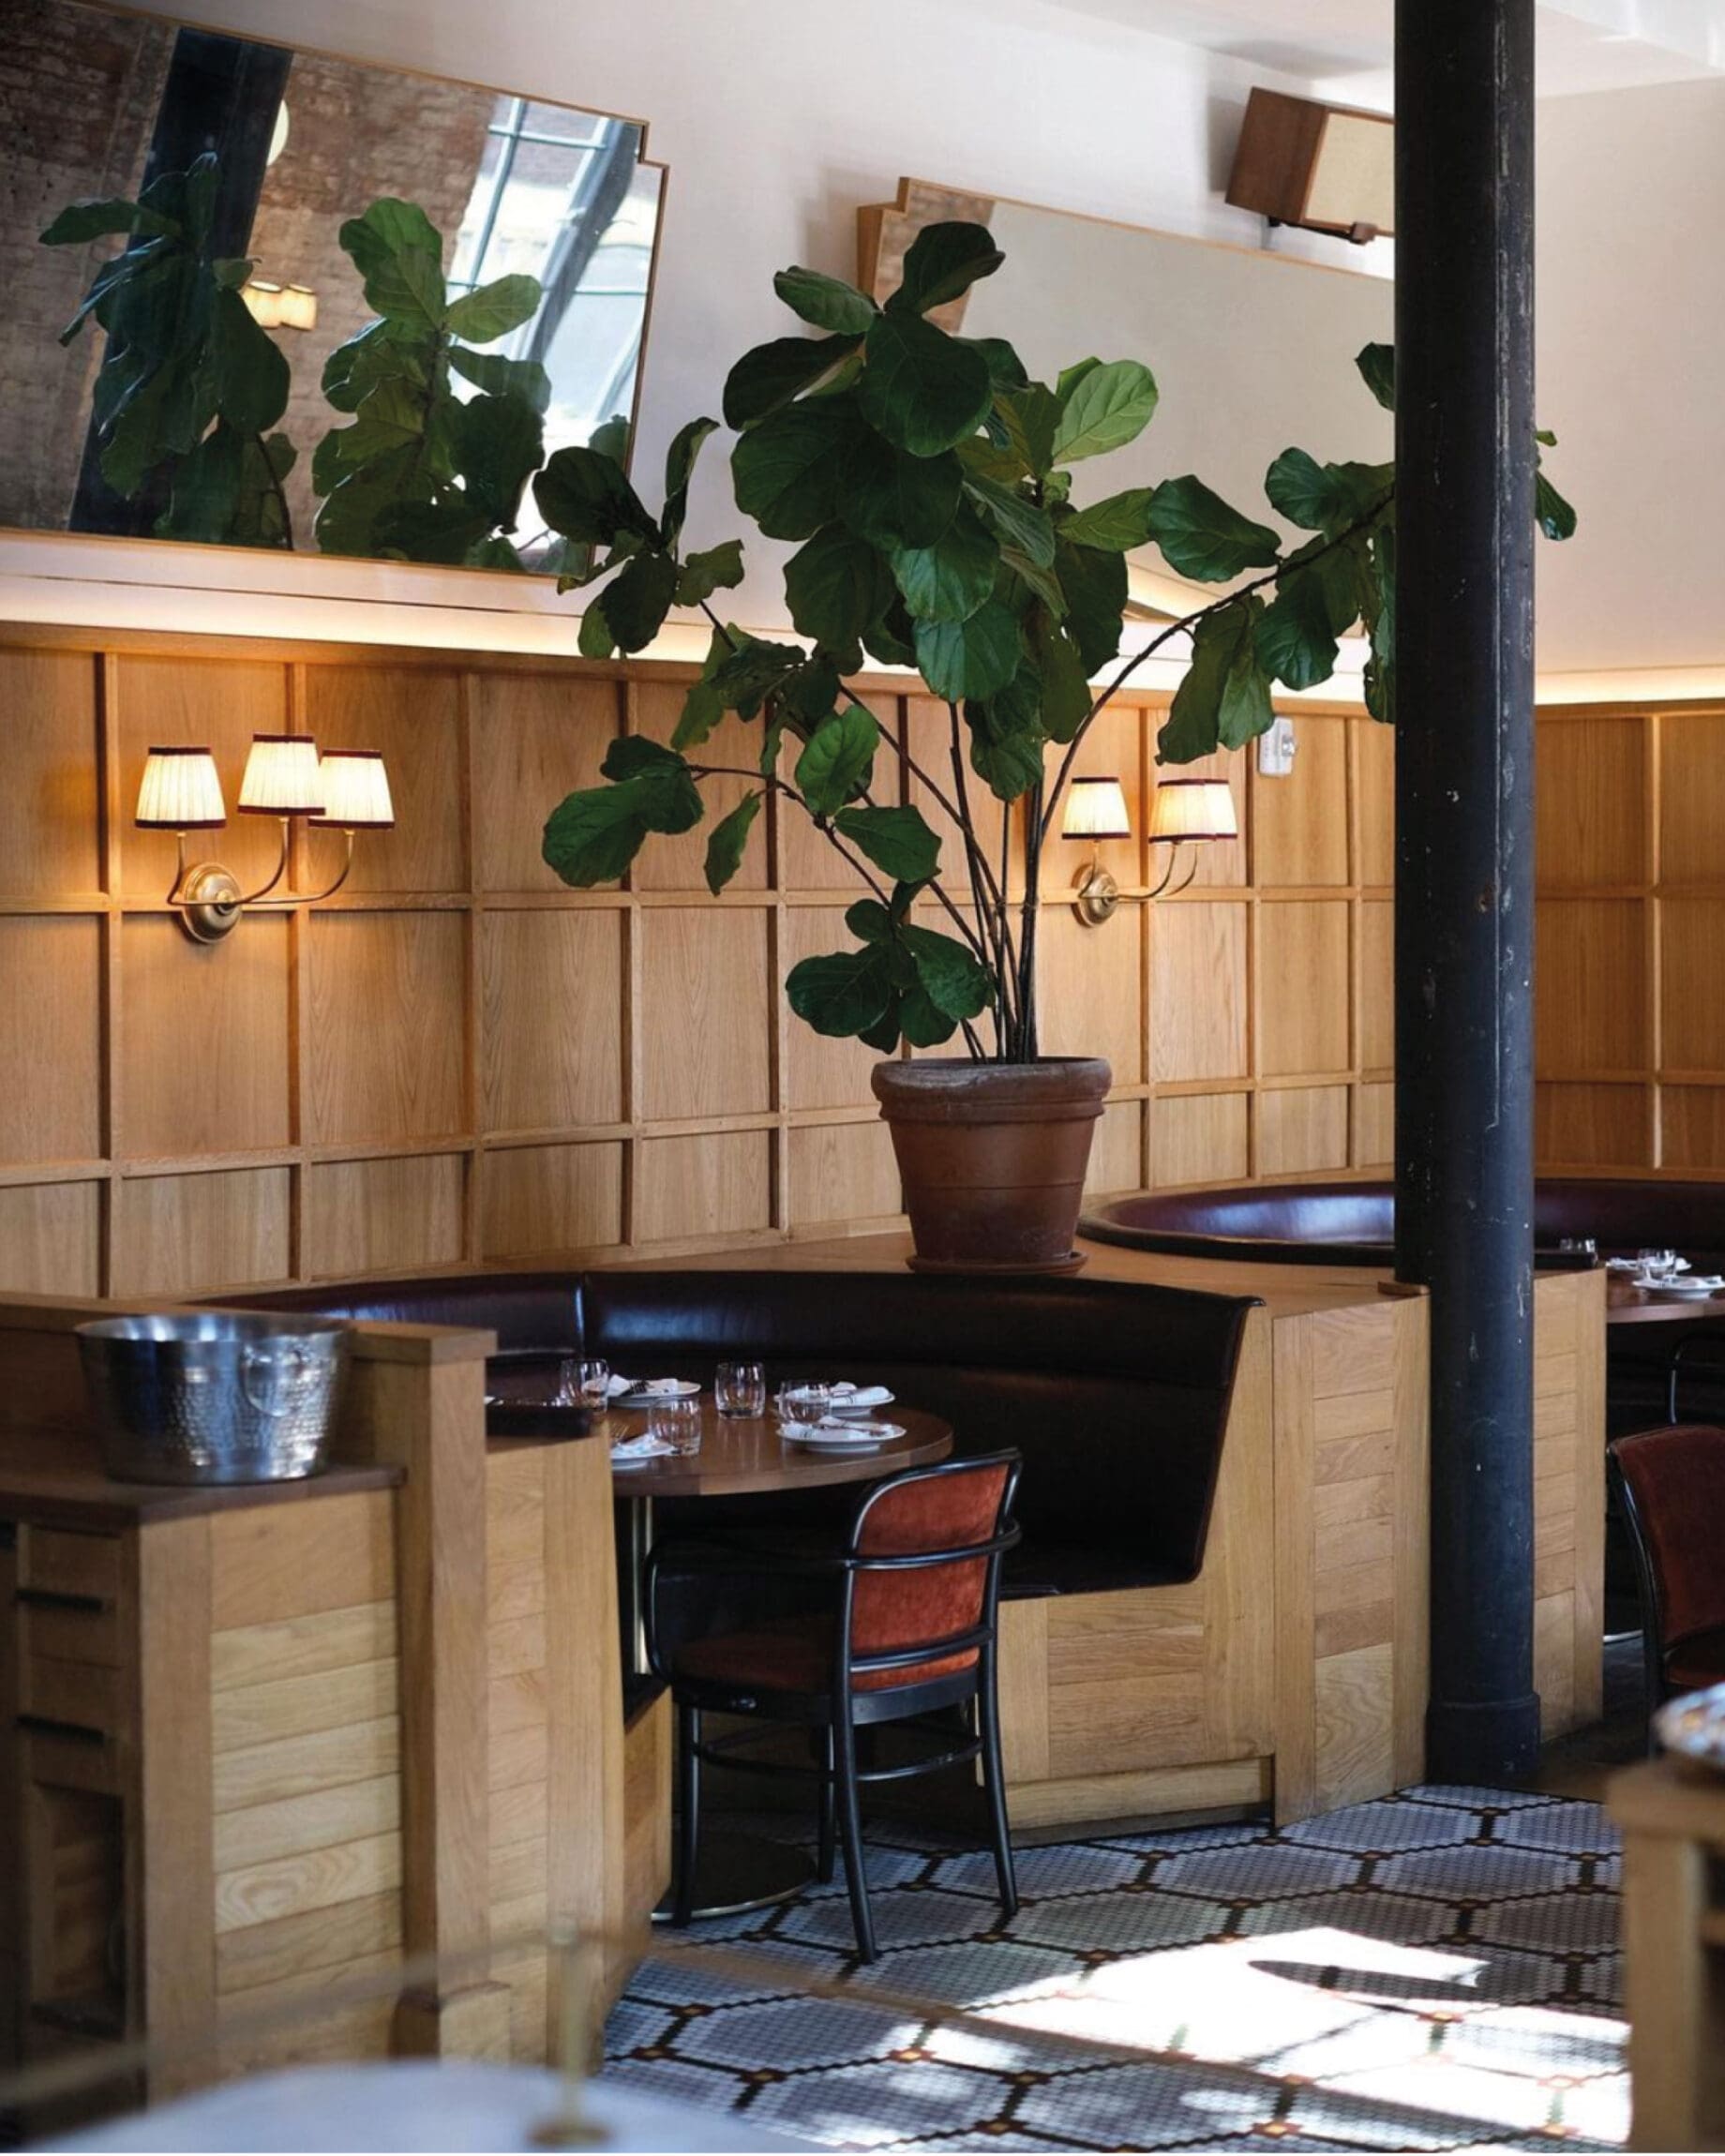 The best restaurants in Williamsburg, NY | An oversized plant at Le Crocodile at the Wythe Hotel